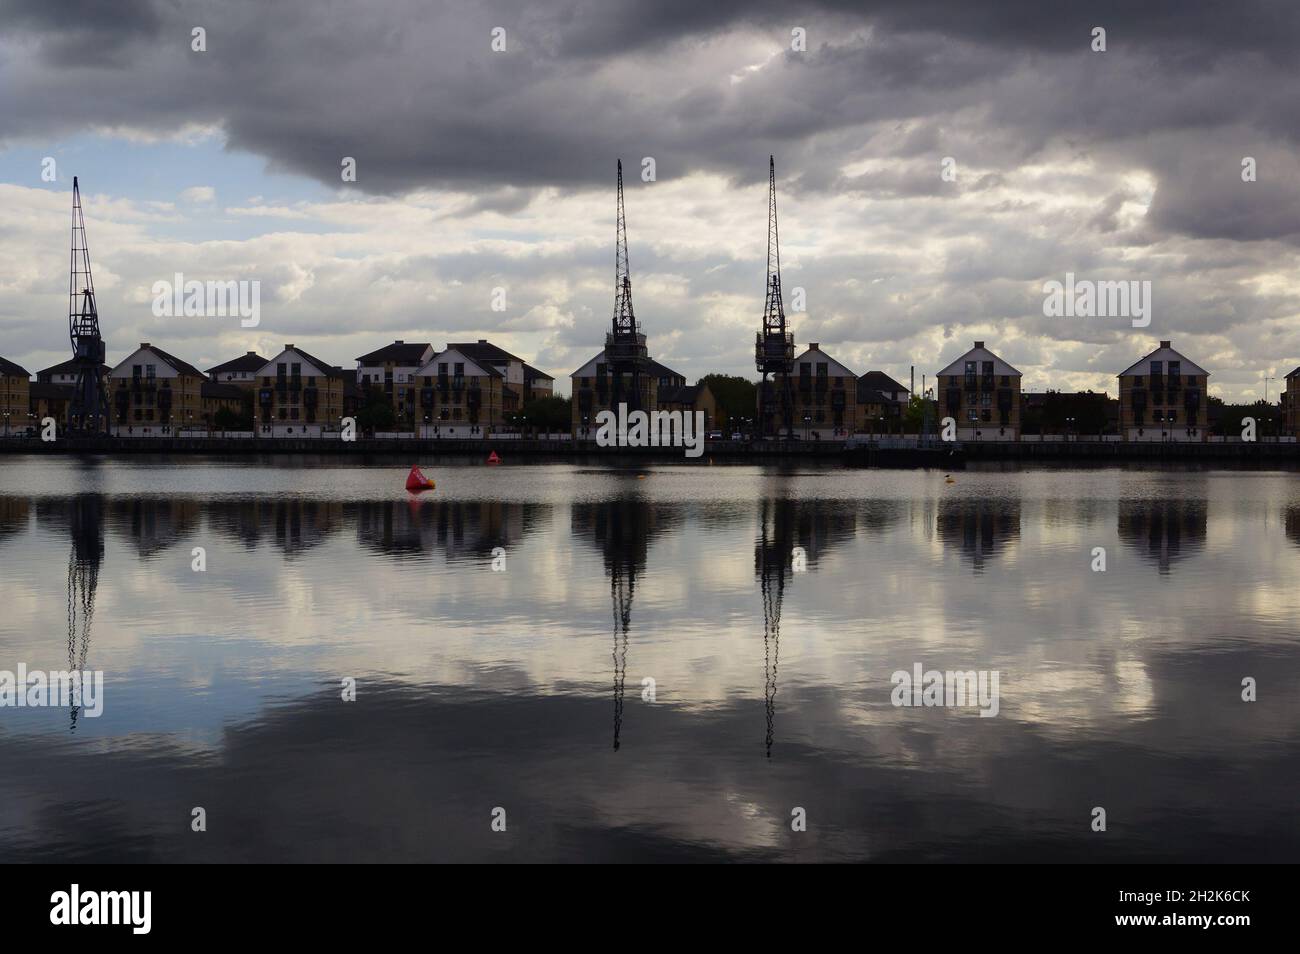 Cranes and houses reflecting in the water at London Royal Docks in east London (UK) Stock Photo